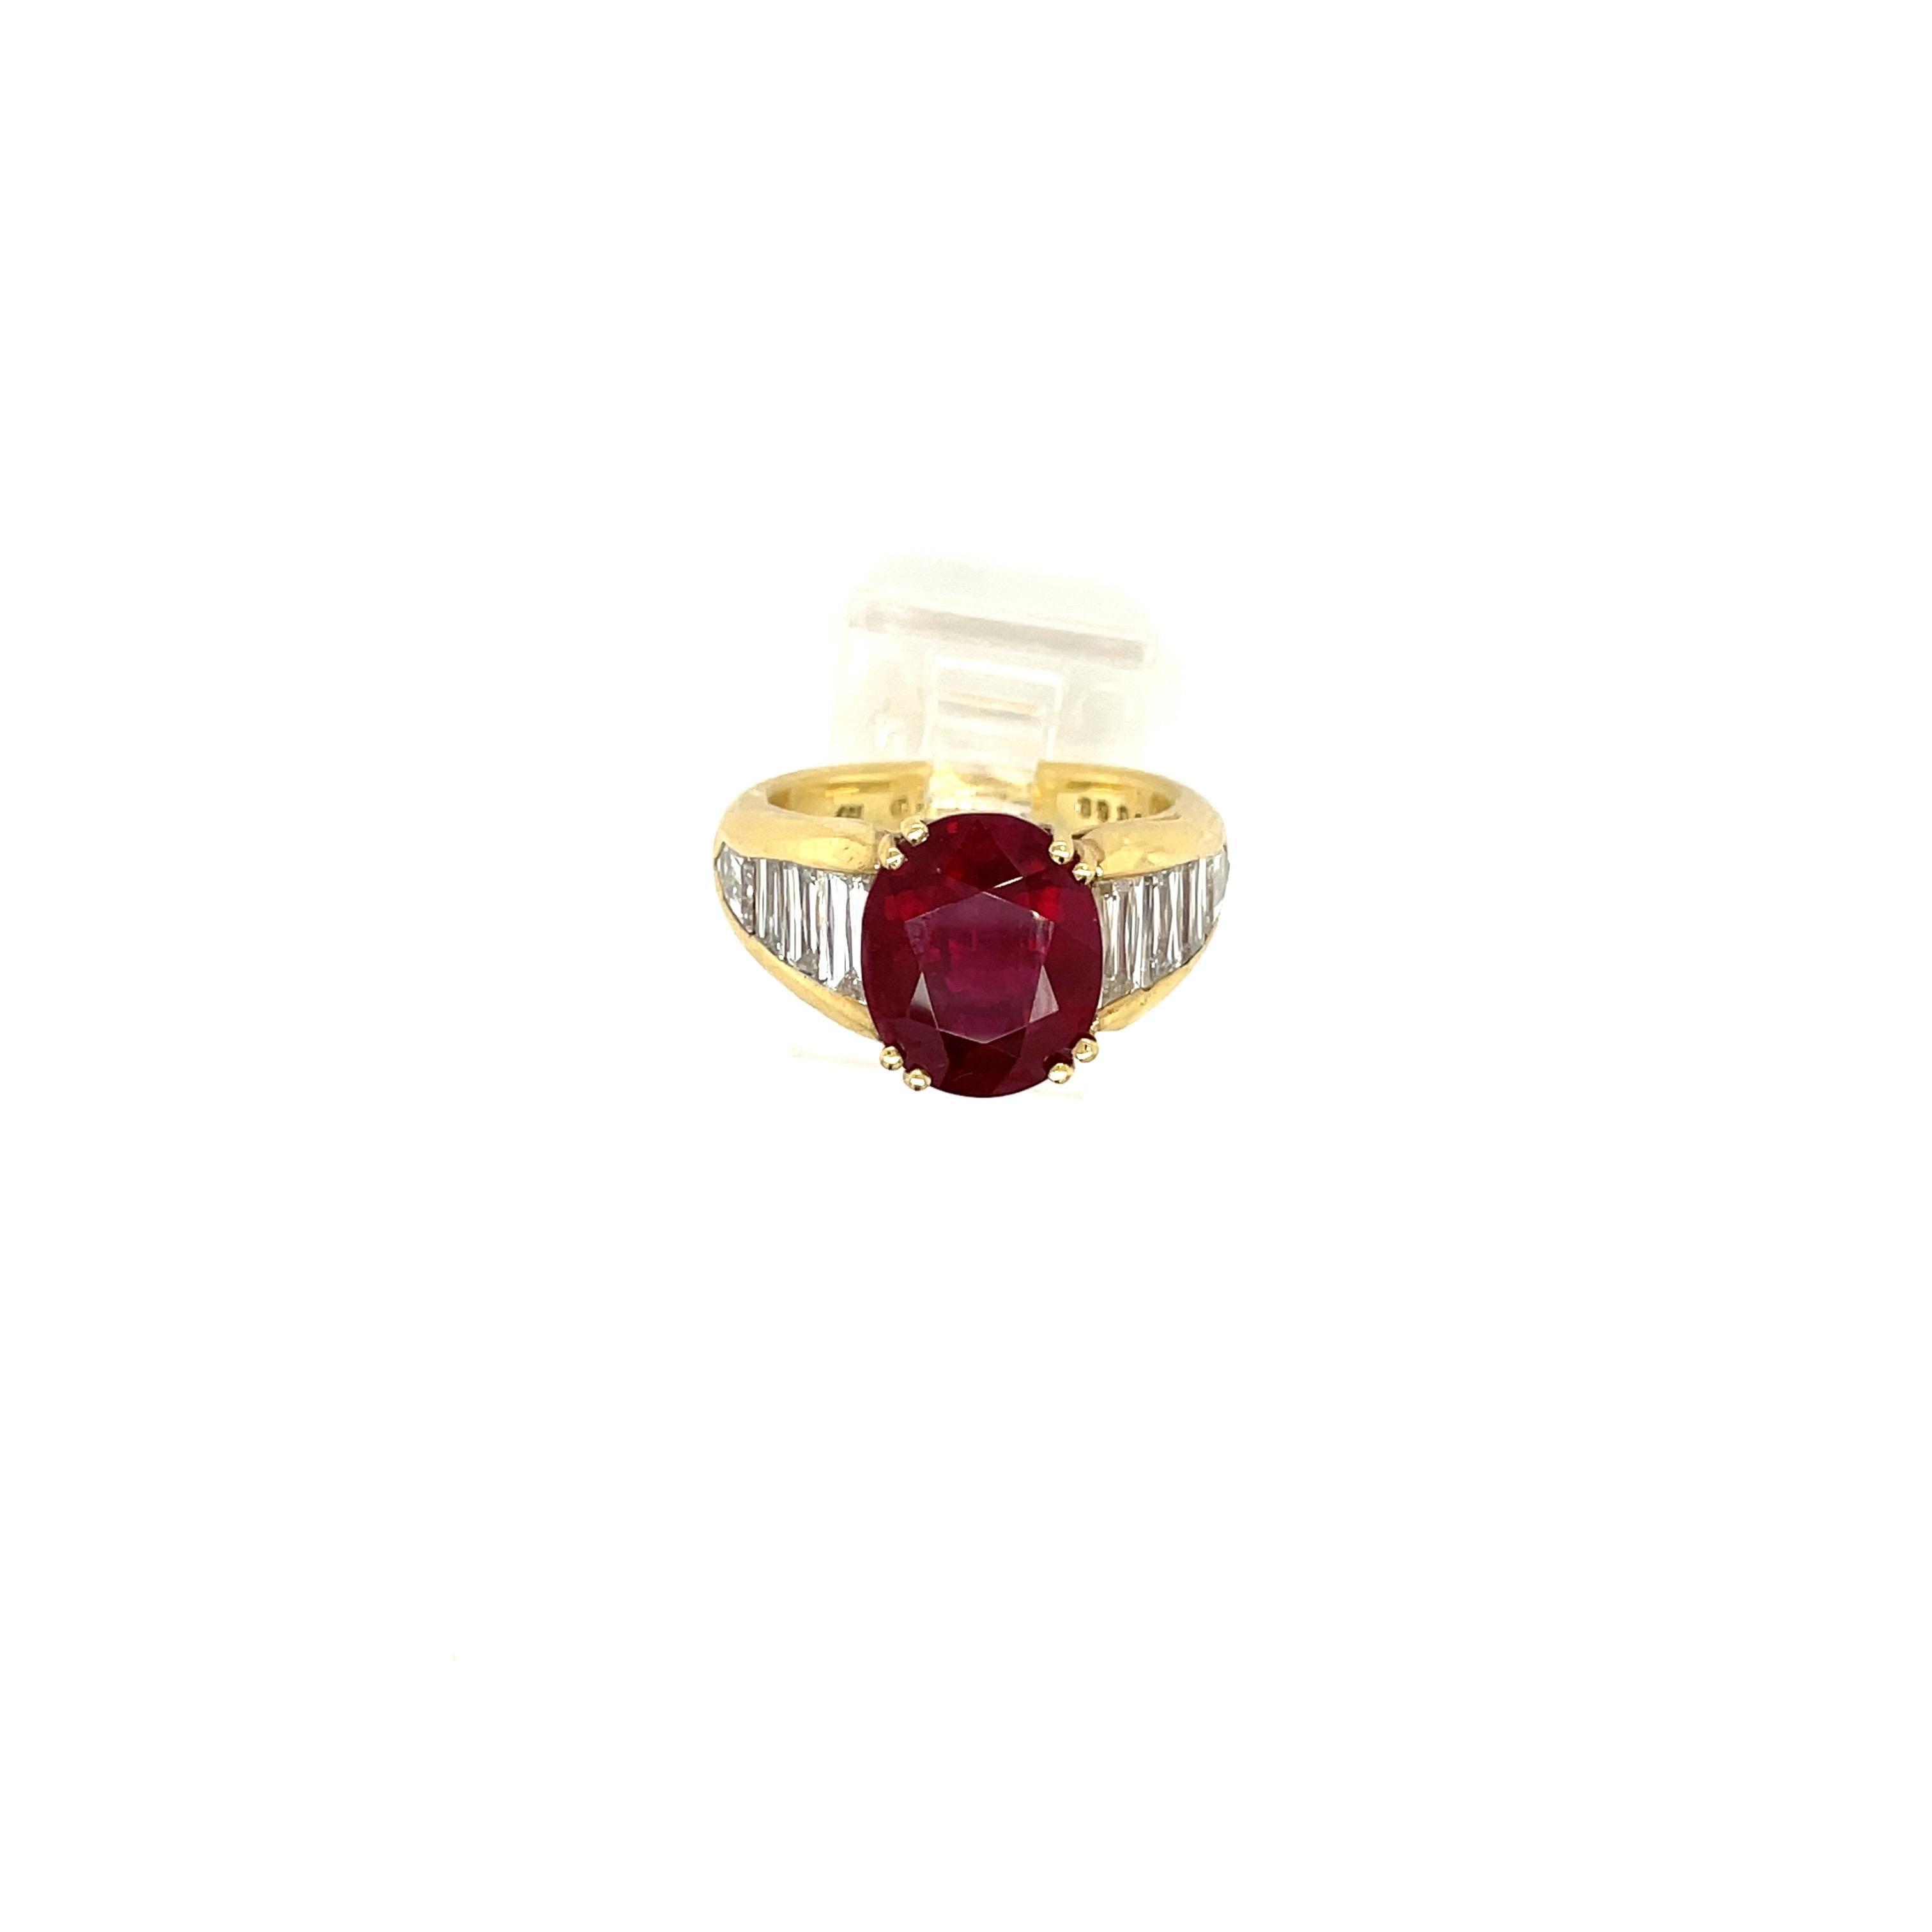 This 18 karat yellow gold ring centers a magnificent oval ruby weighing 5.96 carats. The setting is designed with 3 baguettes diamonds on each side, along with a bullet shaped diamond at its bottom. This setting highlights the center beautifully